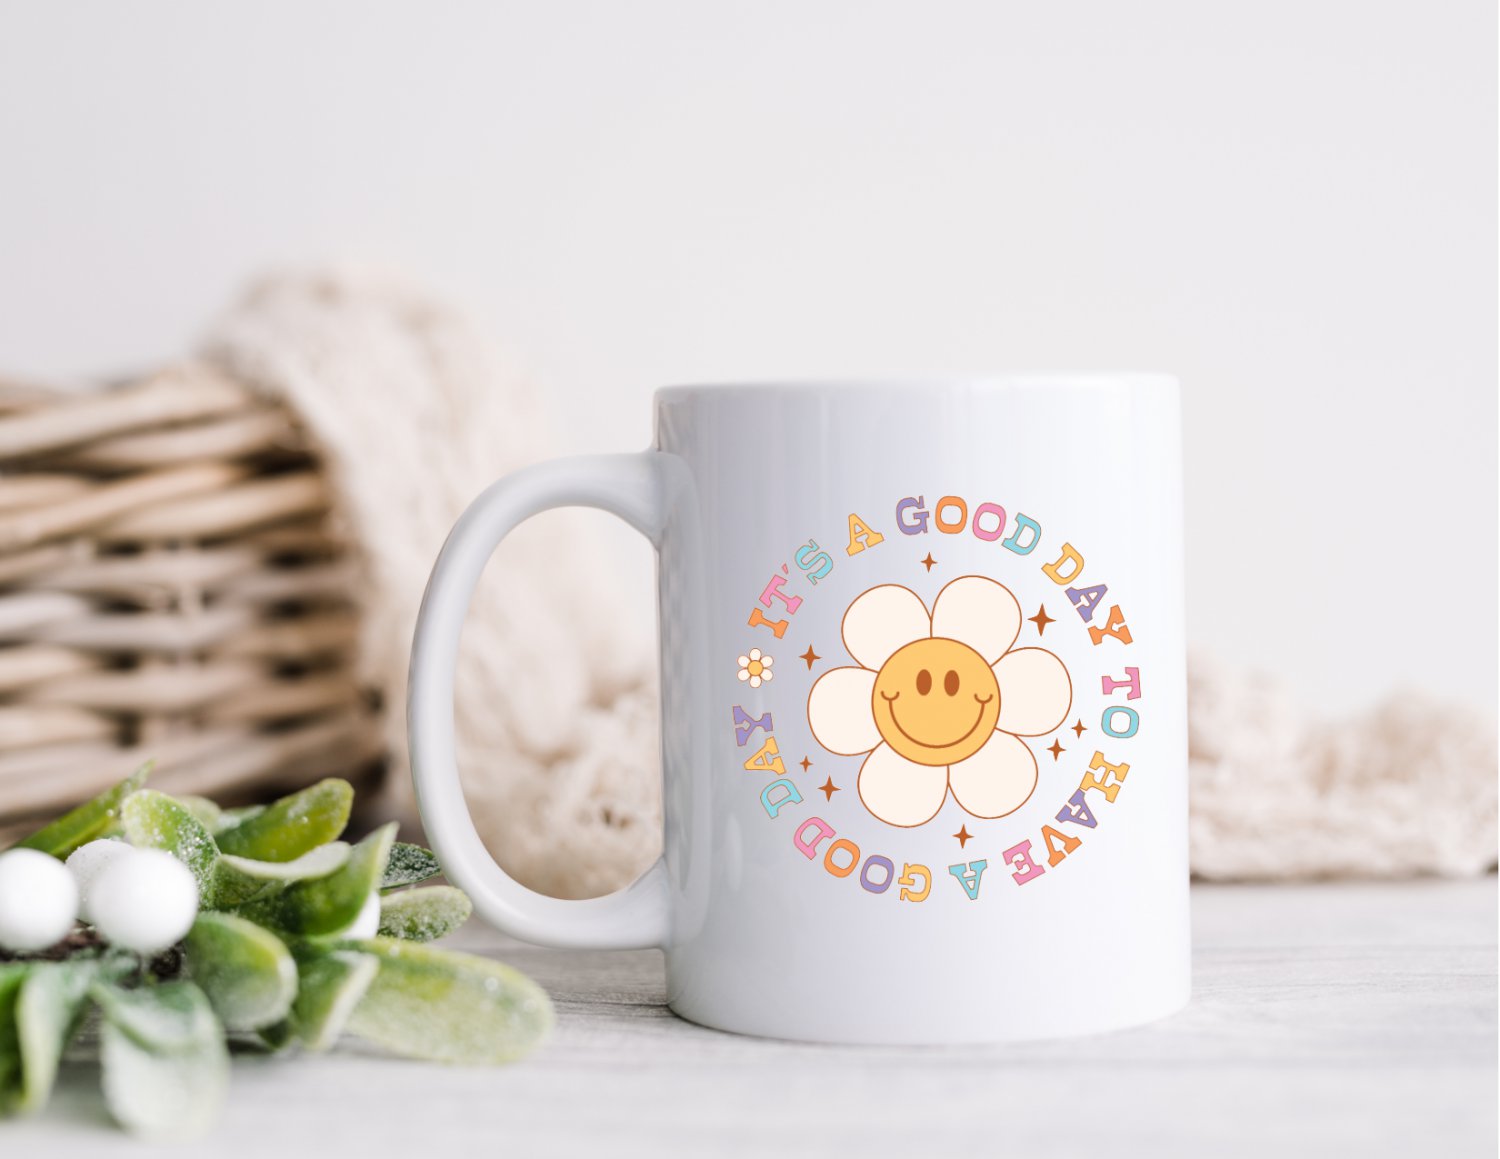 11 oz Ceramic Mug | Its a Good Day to Have Good Day